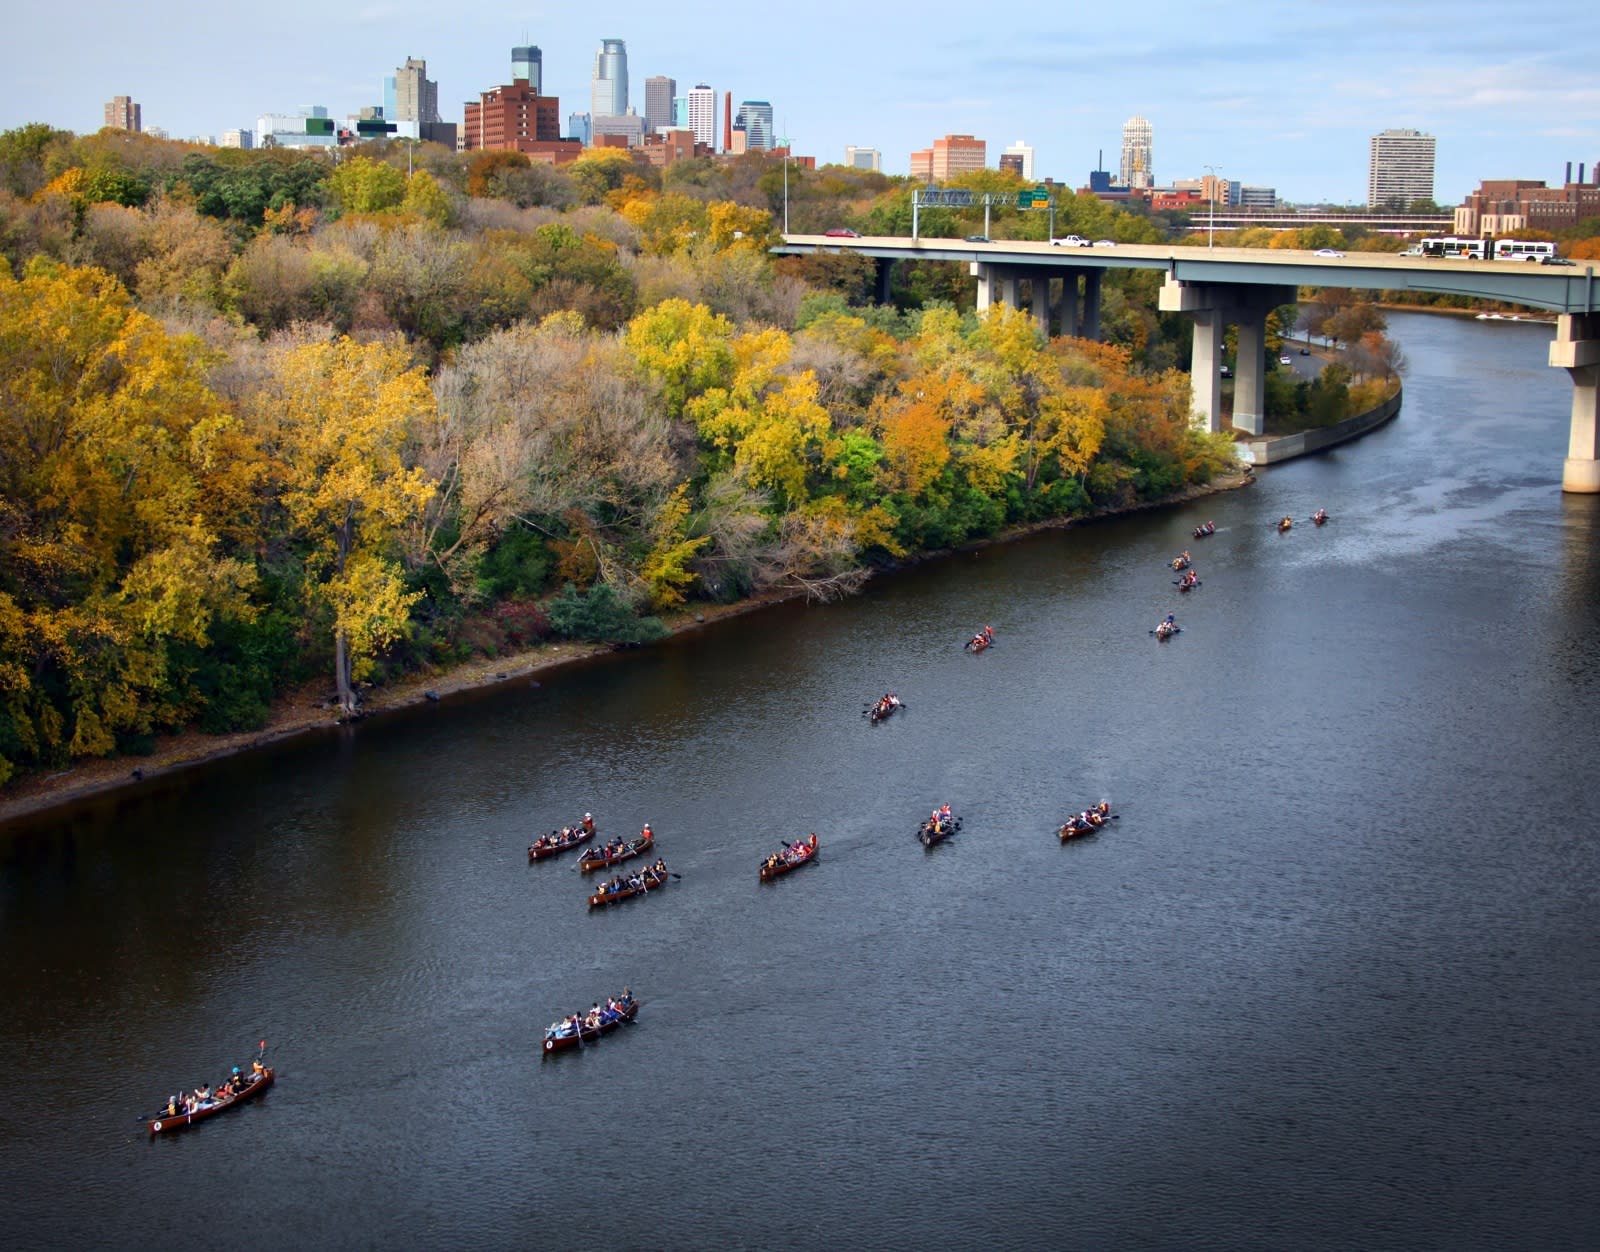 People on canoes in the Fall